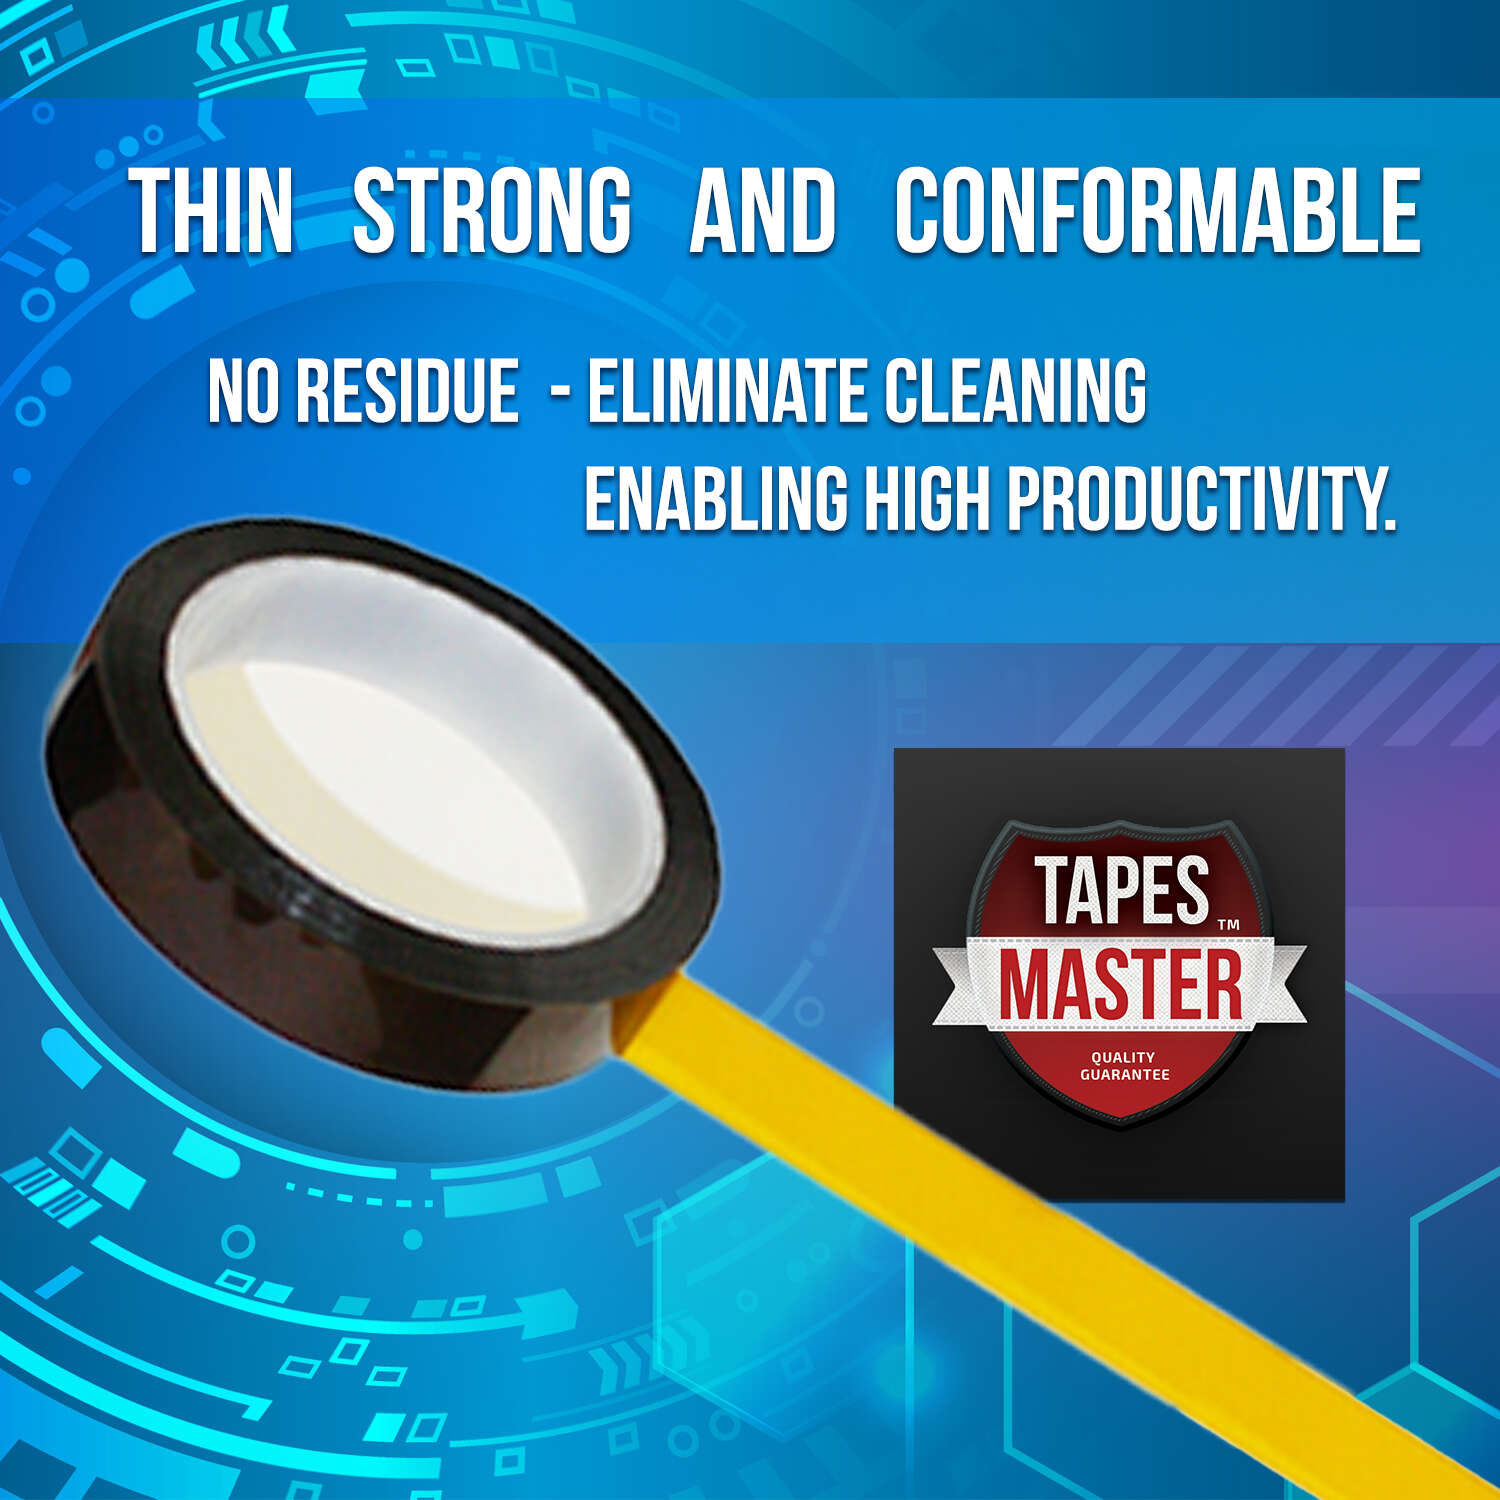  Tapes Master 1 Mil Kapton Tape - Polyimide High Temperature Tape with Silicone Adhesive